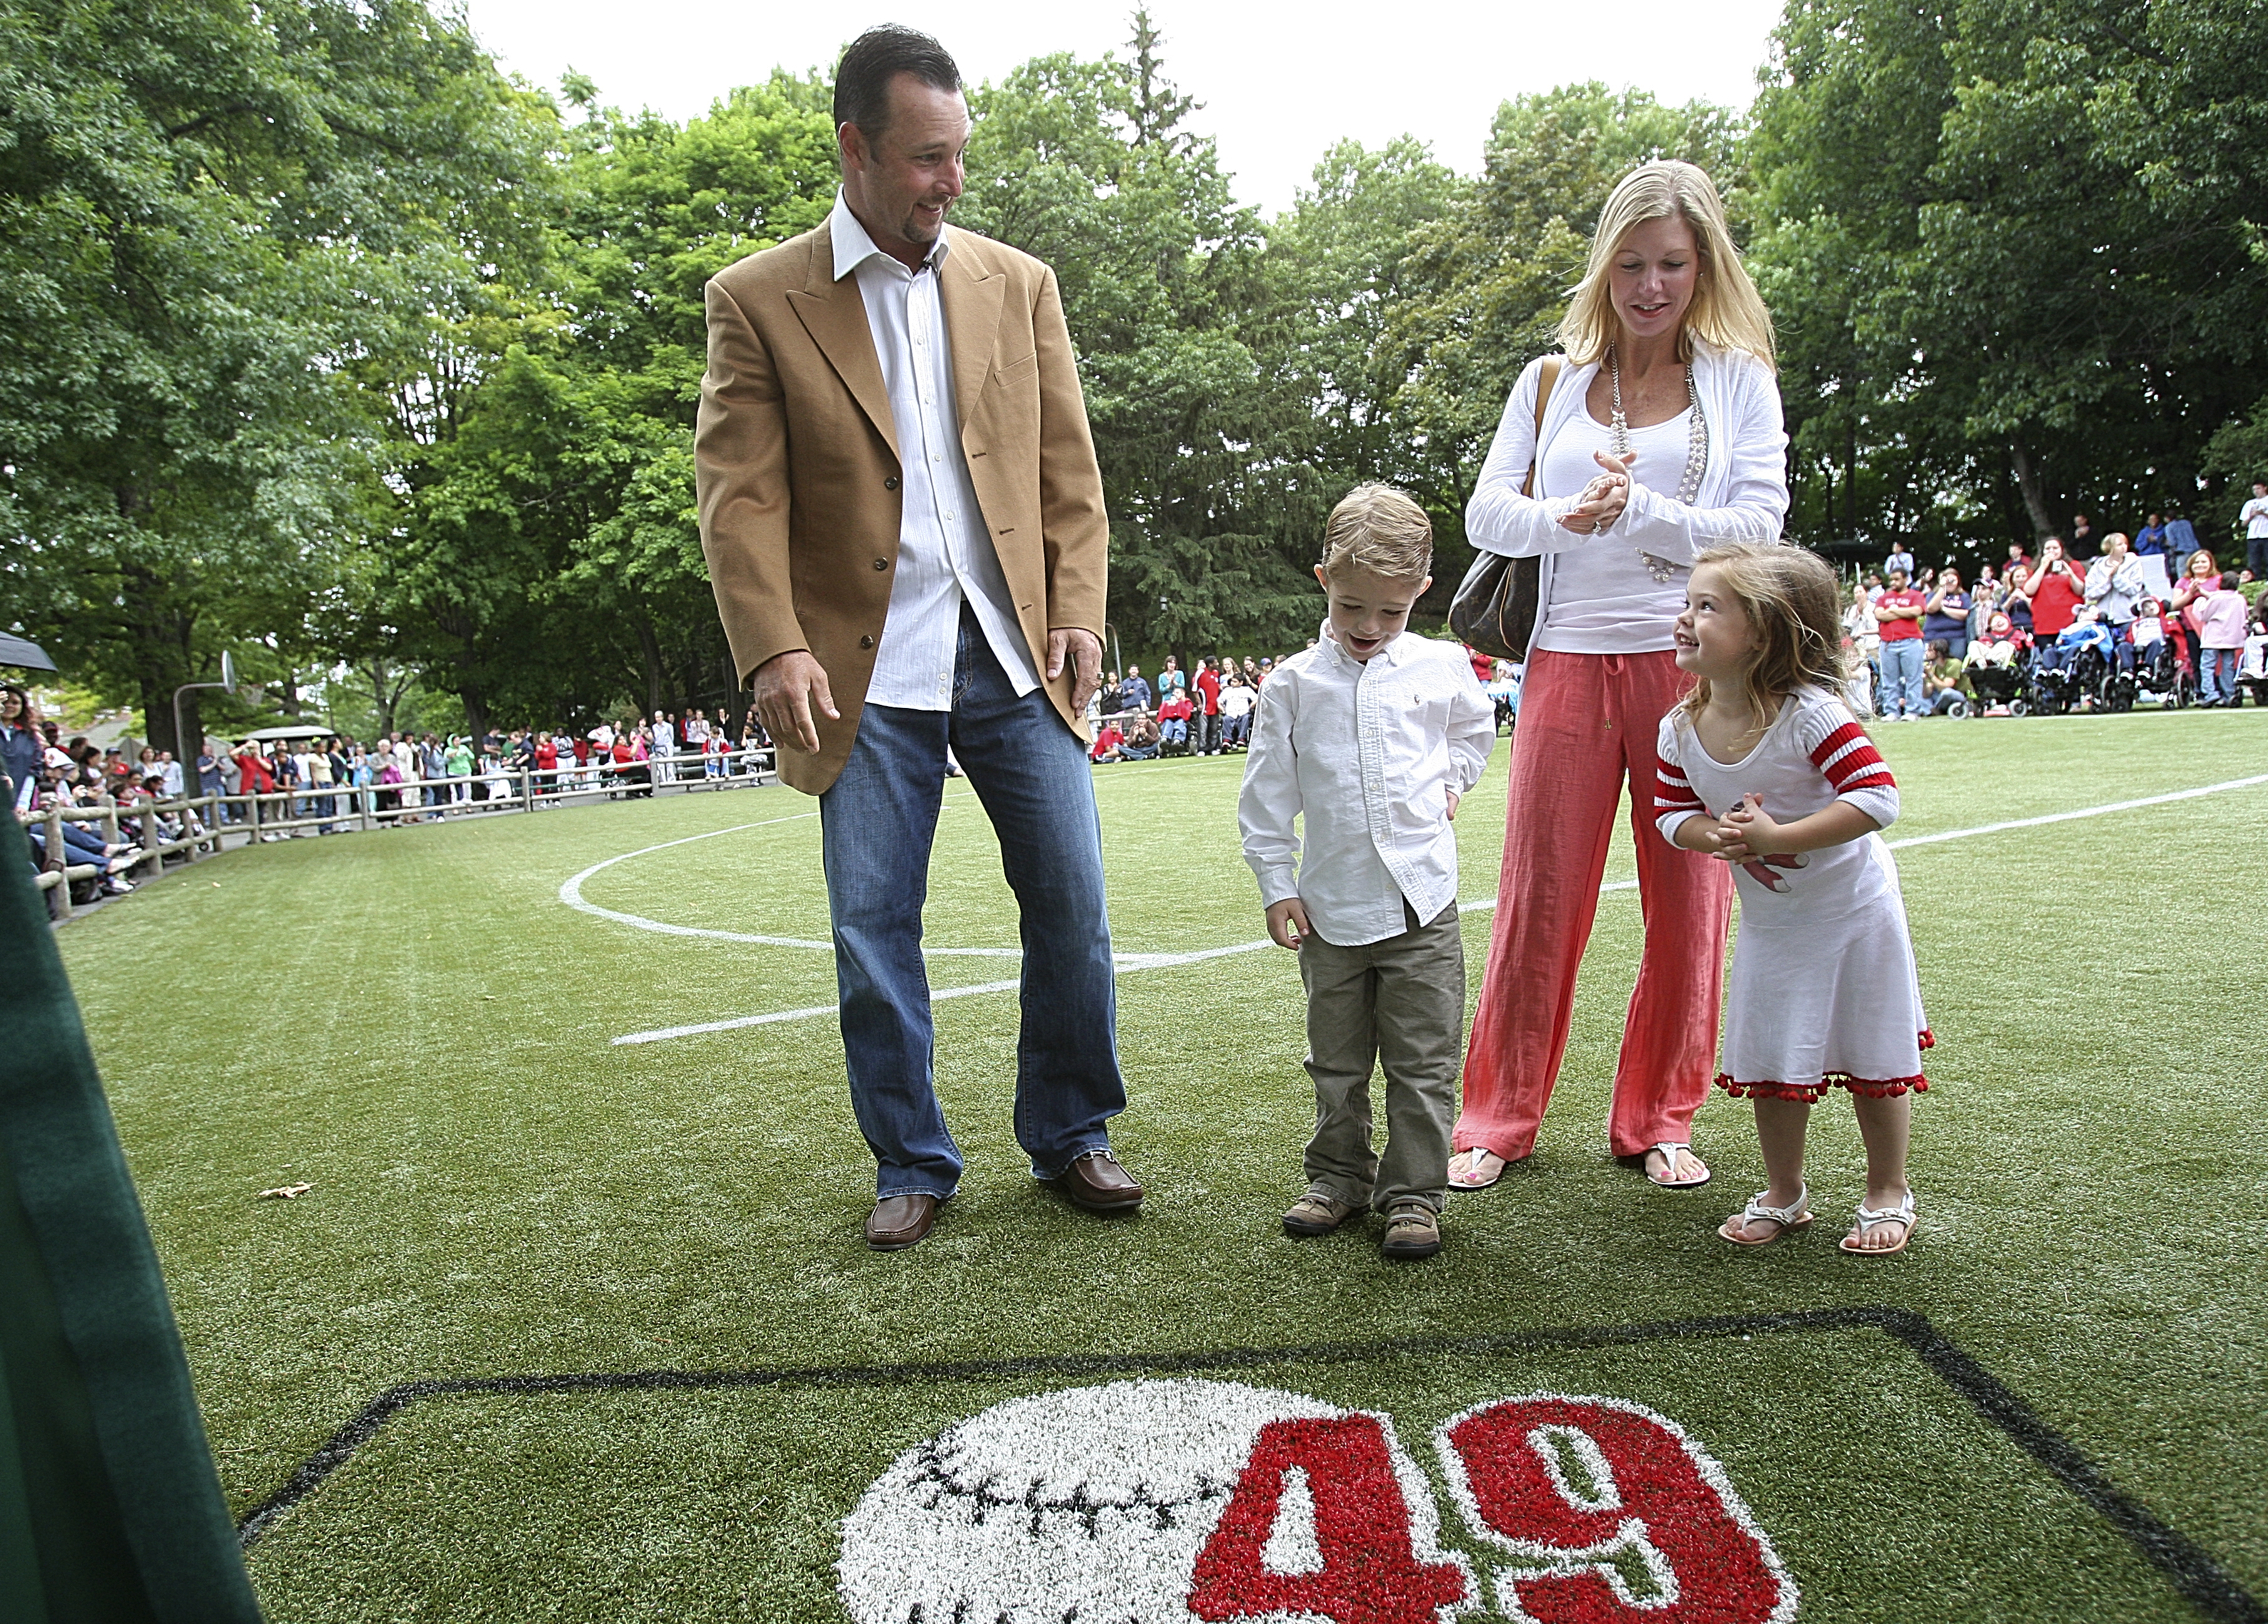 Tim, Trevor, Stacy, and Brianna Wakefield at Tim's field dedication by Franciscan Hospital in Brighton, Massachusetts | Source: Getty Images